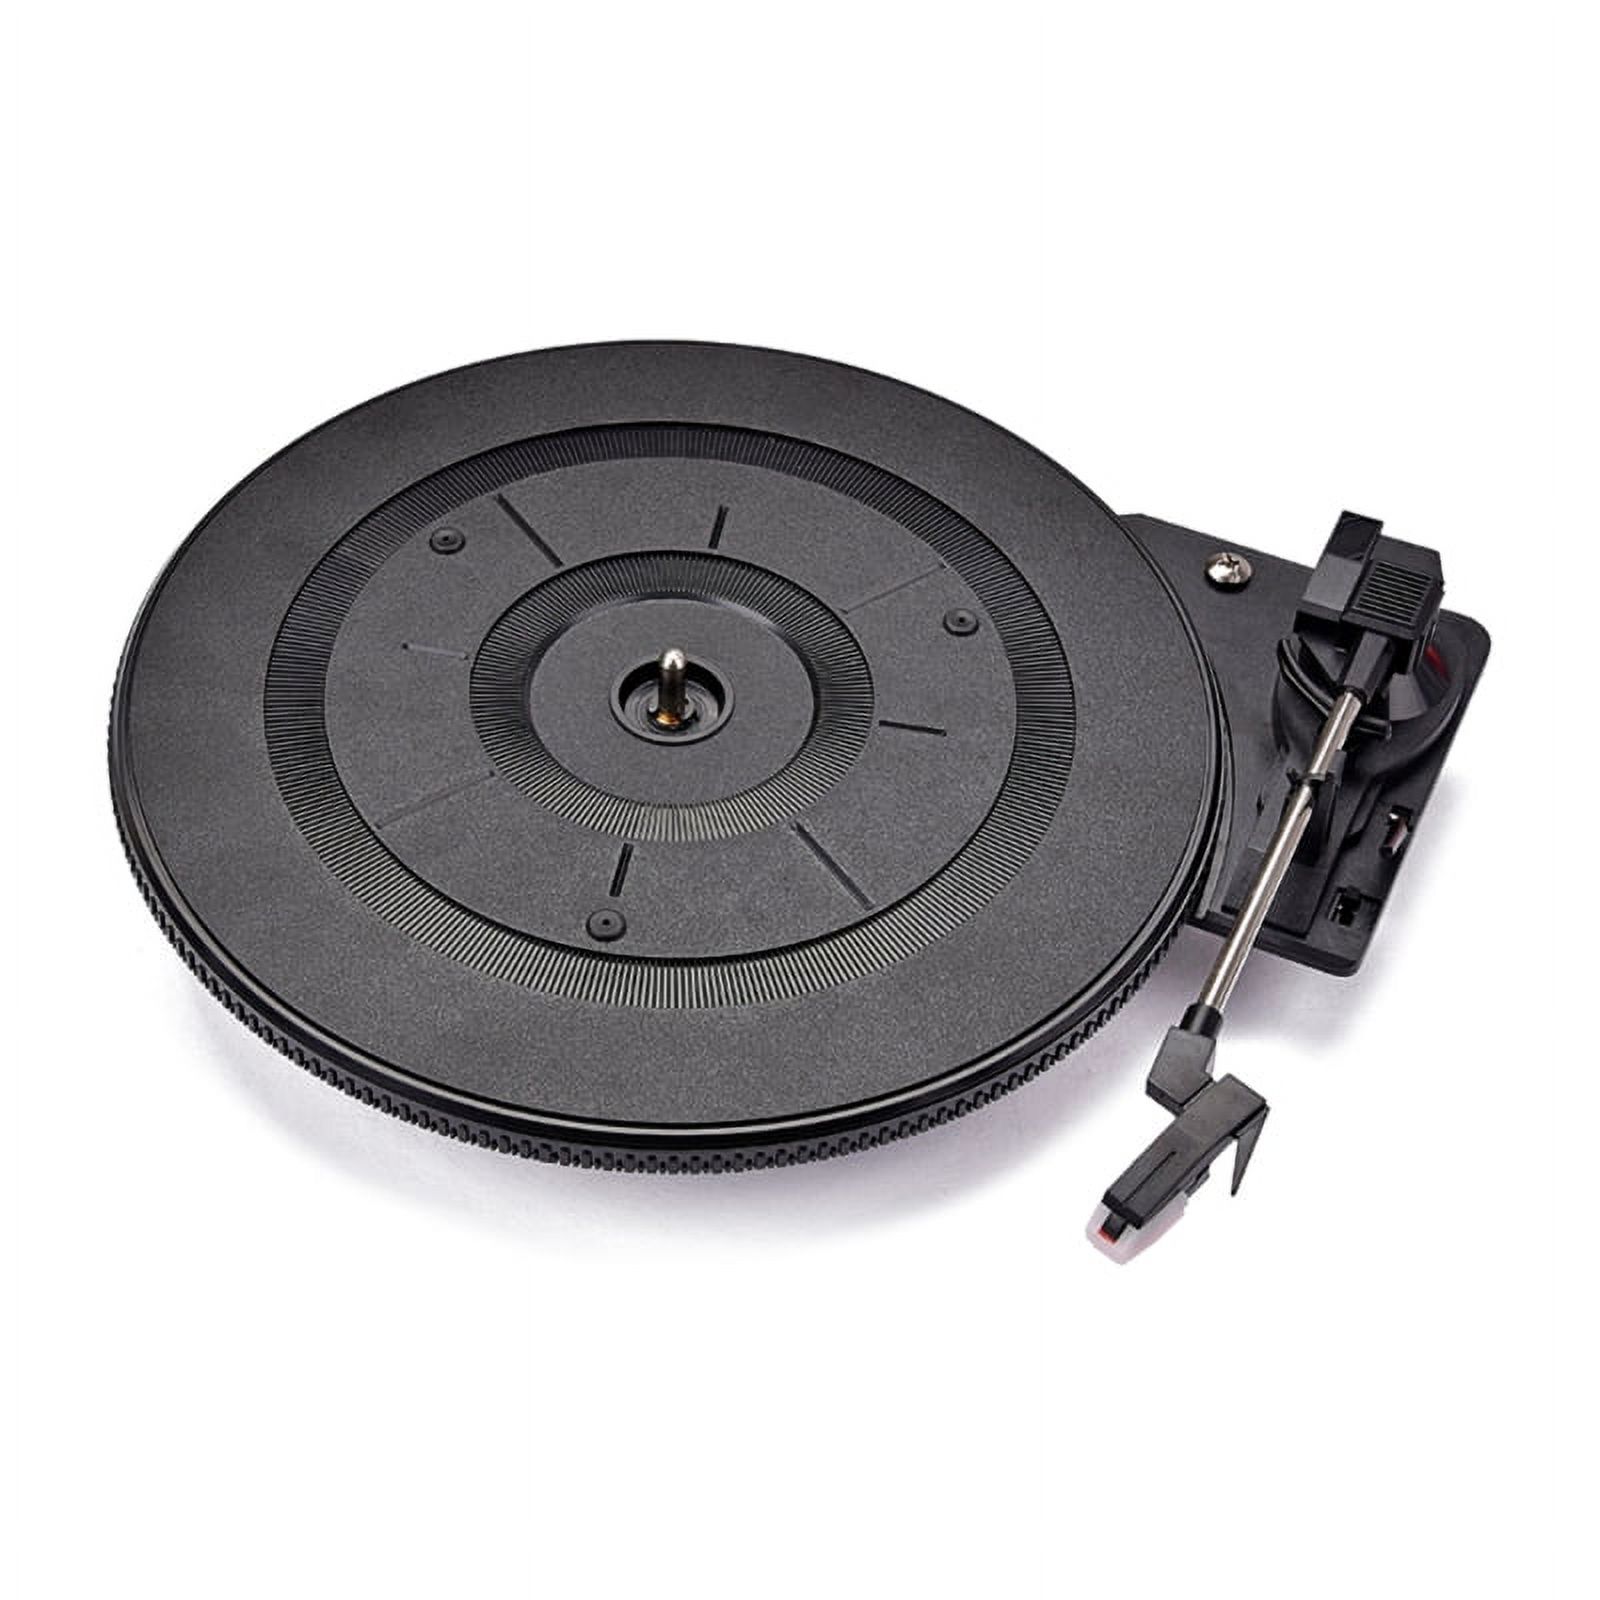 Turntable Automatic Arm Return Record Player Turntable Gramophone  Accessories Parts for Lp Vinyl Record Player 